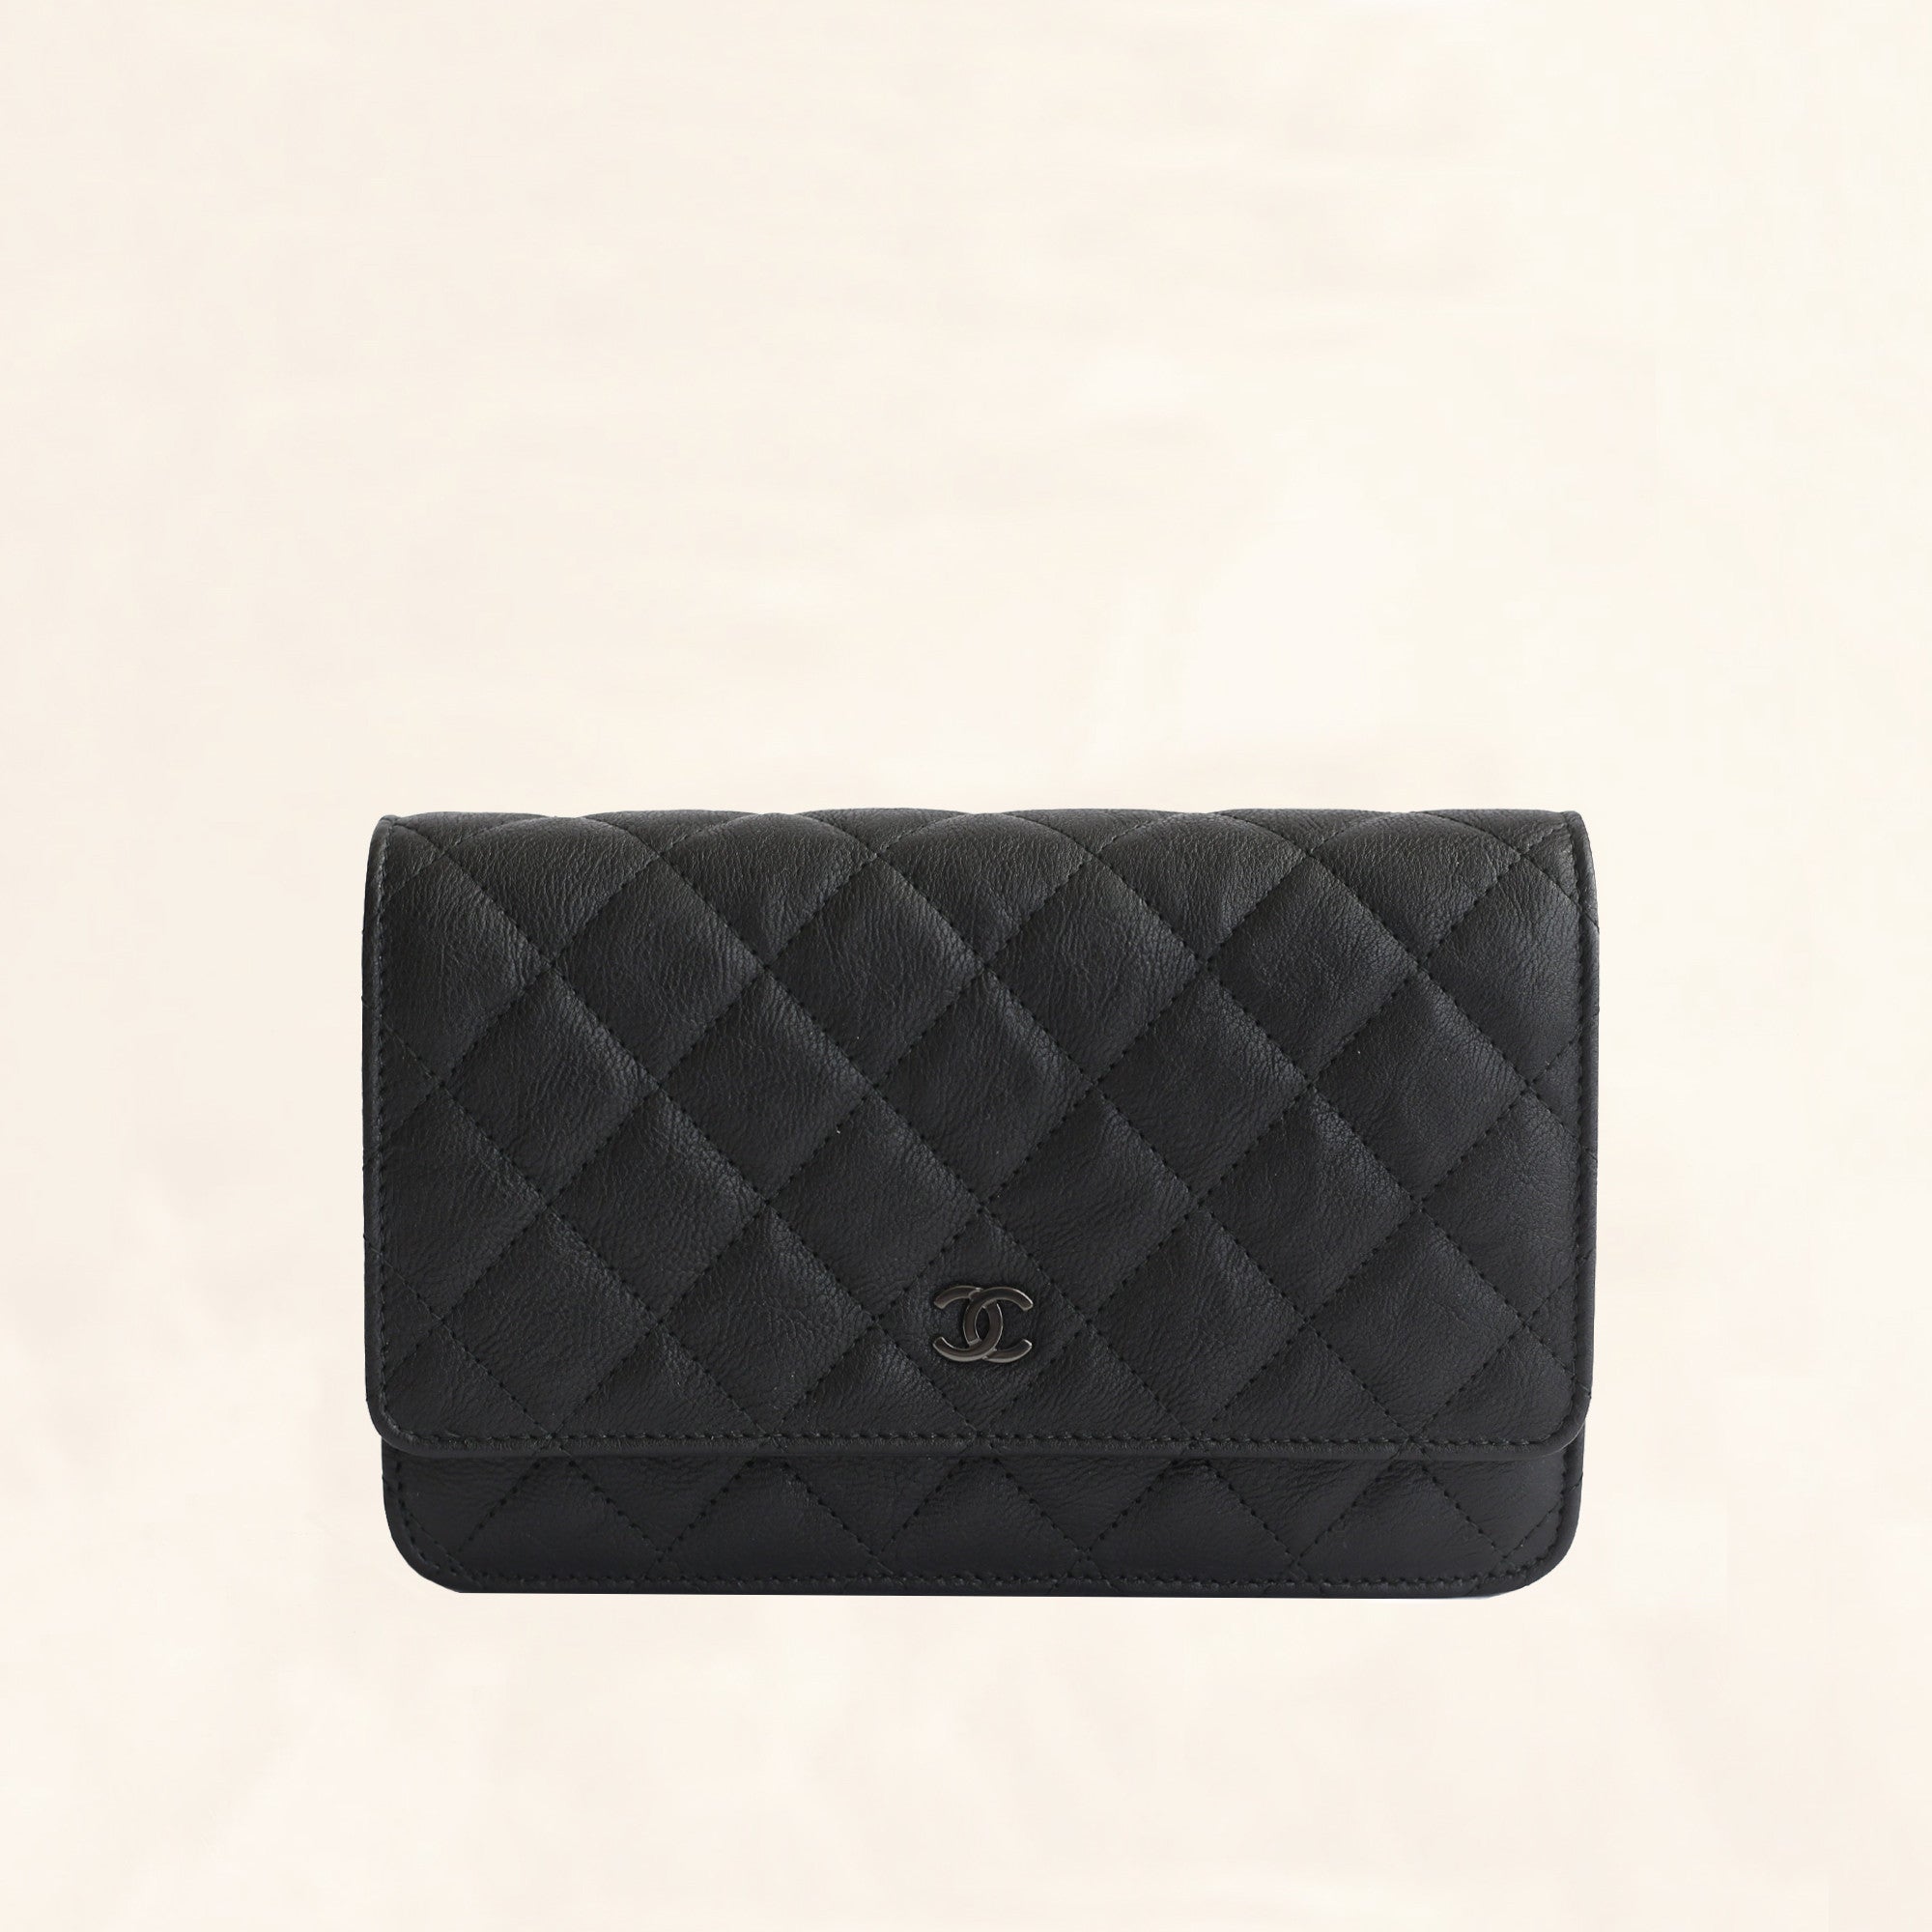 Chanel | Calfskin Classic So Black Wallet on Chain | WOC